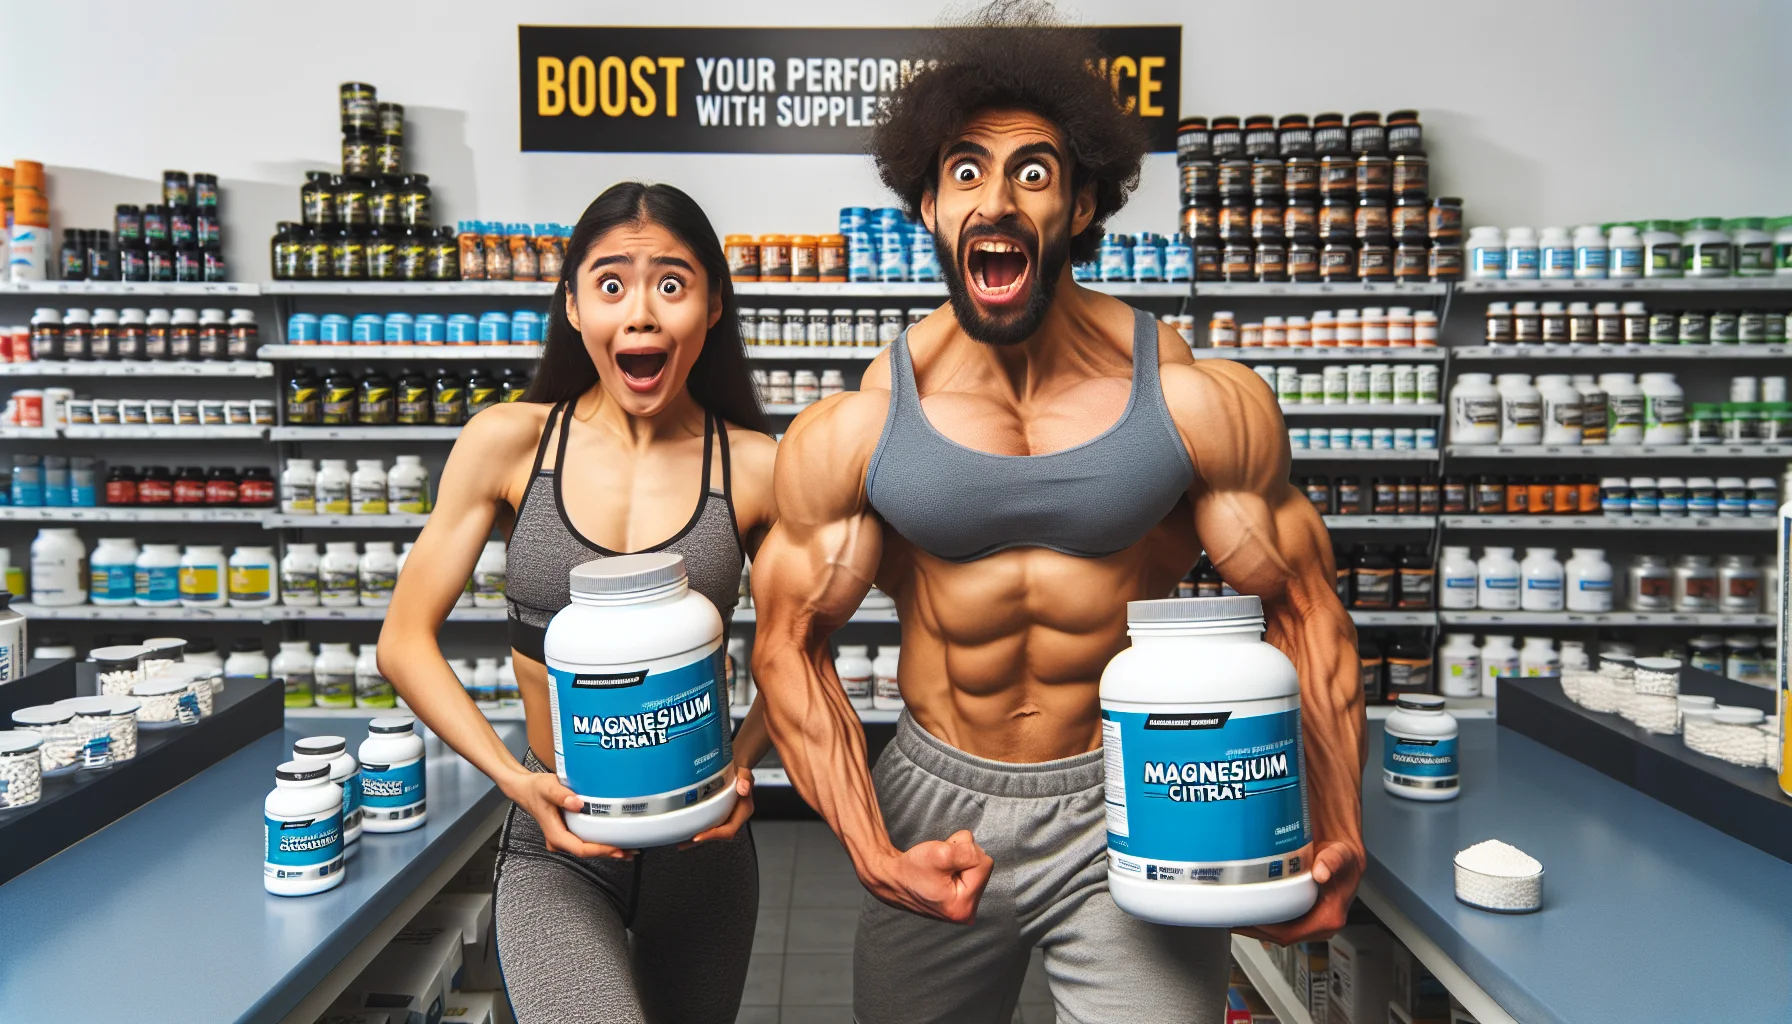 Create a humorous, brightly-colored scene where a muscular, Hispanic male athlete and an athletic, South Asian female are standing in a health store, holding large containers of magnesium citrate supplements. They are making exaggerated, excited facial expressions as if they've just discovered the secret to superior sports performance. The shelves behind them are filled with a variety of sports supplements. A sign on the wall reads 'Boost Your Performance With Supplements'.